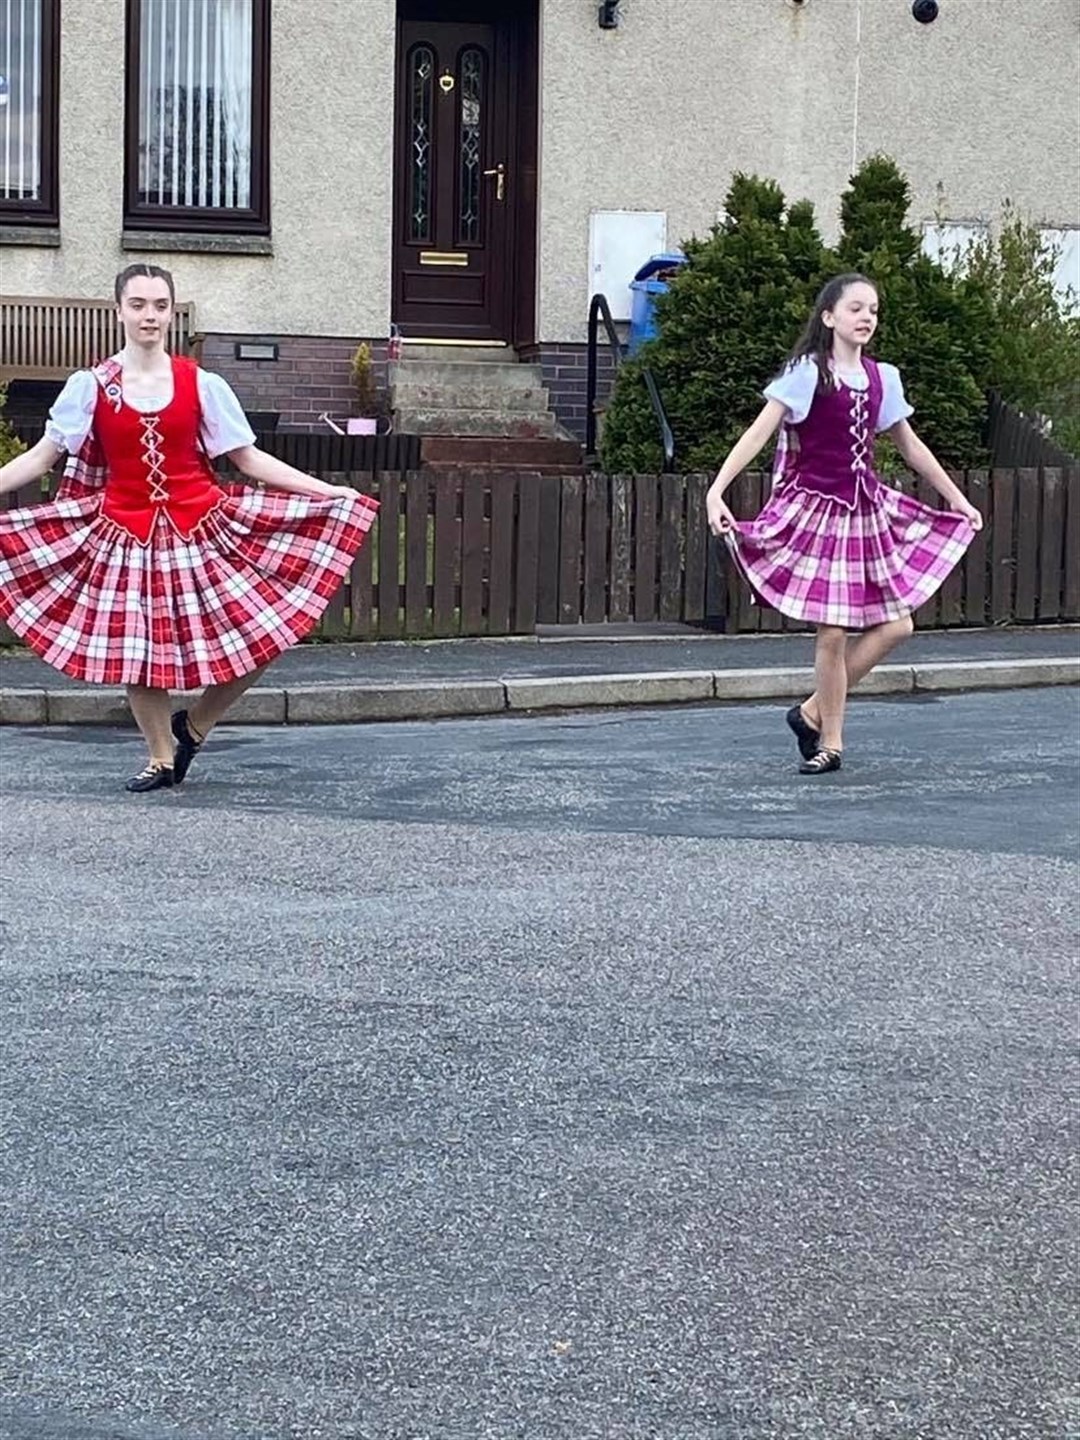 Some Highland dancing from Katie and Lilly Dunbar.